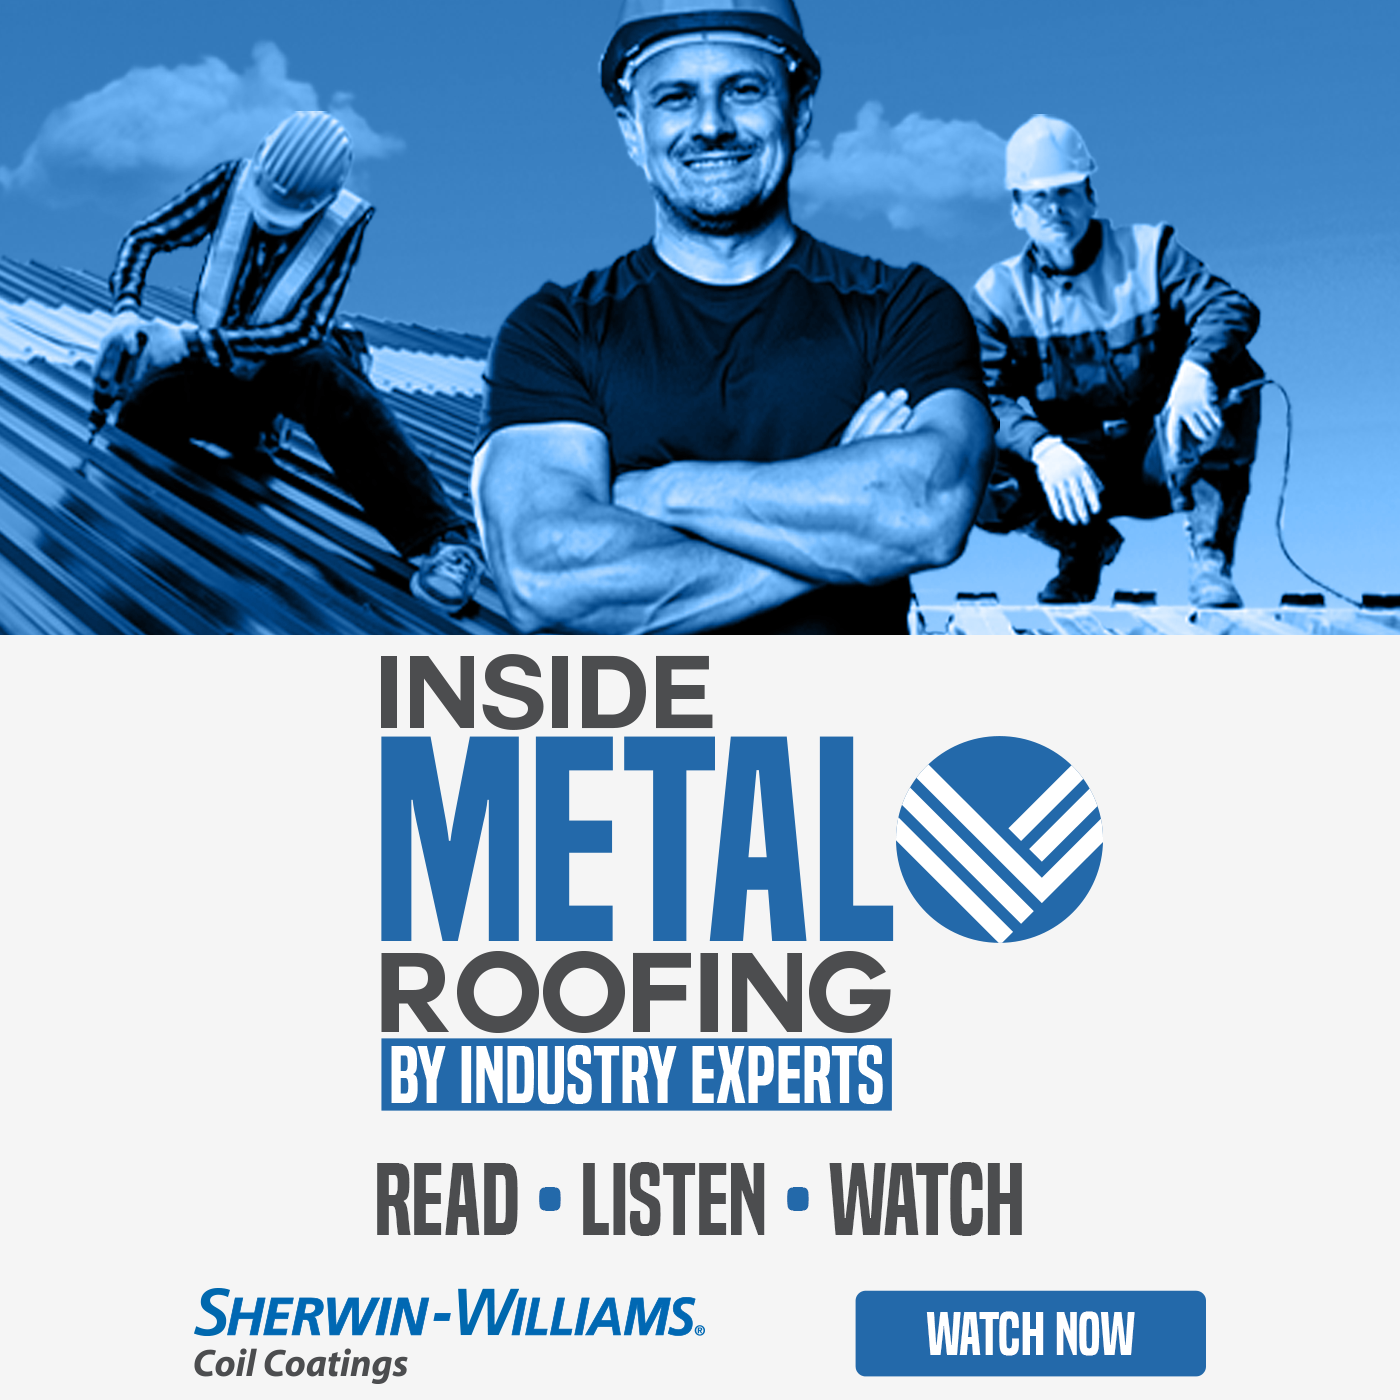 Sherwin Williams - Inside Metal Roofing by Industry Experts - POD